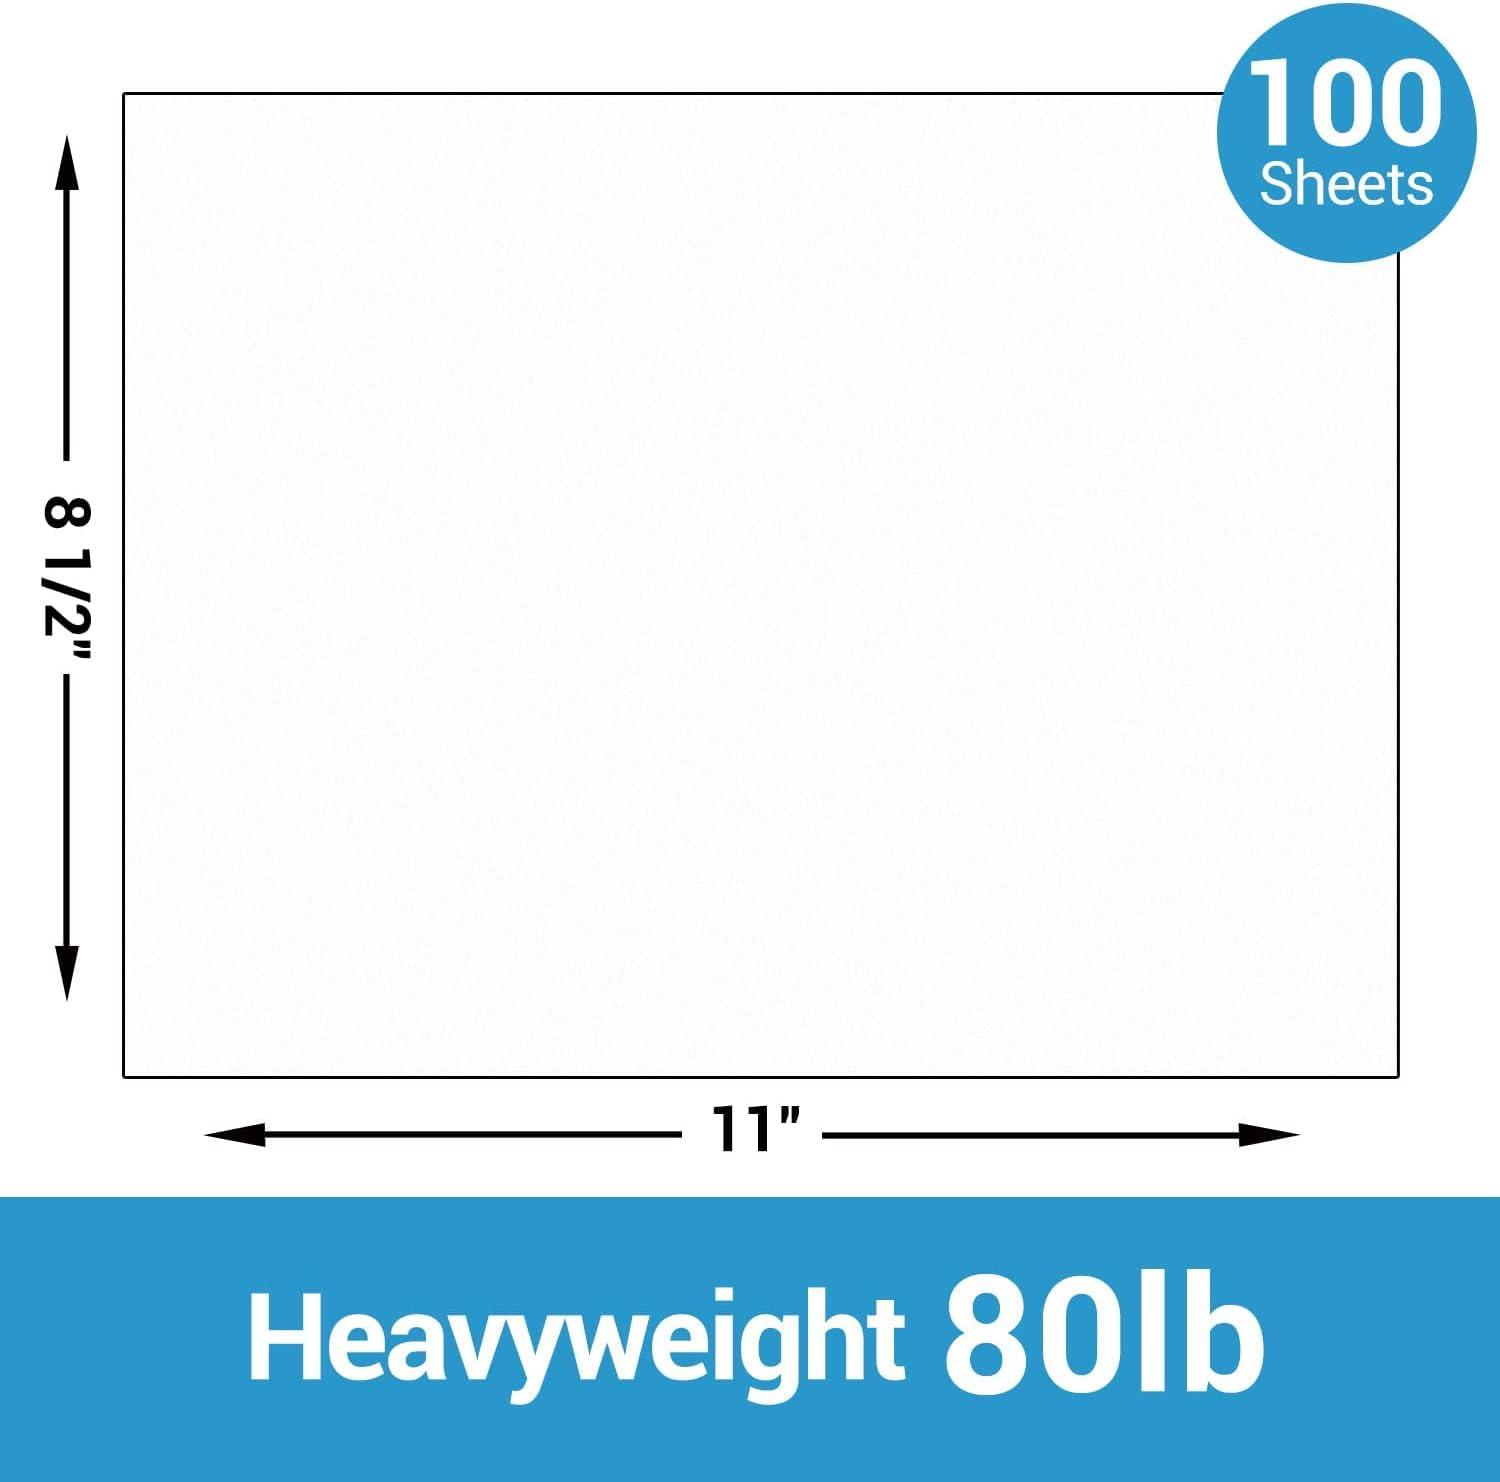 White Card Stock - 100 Sheets